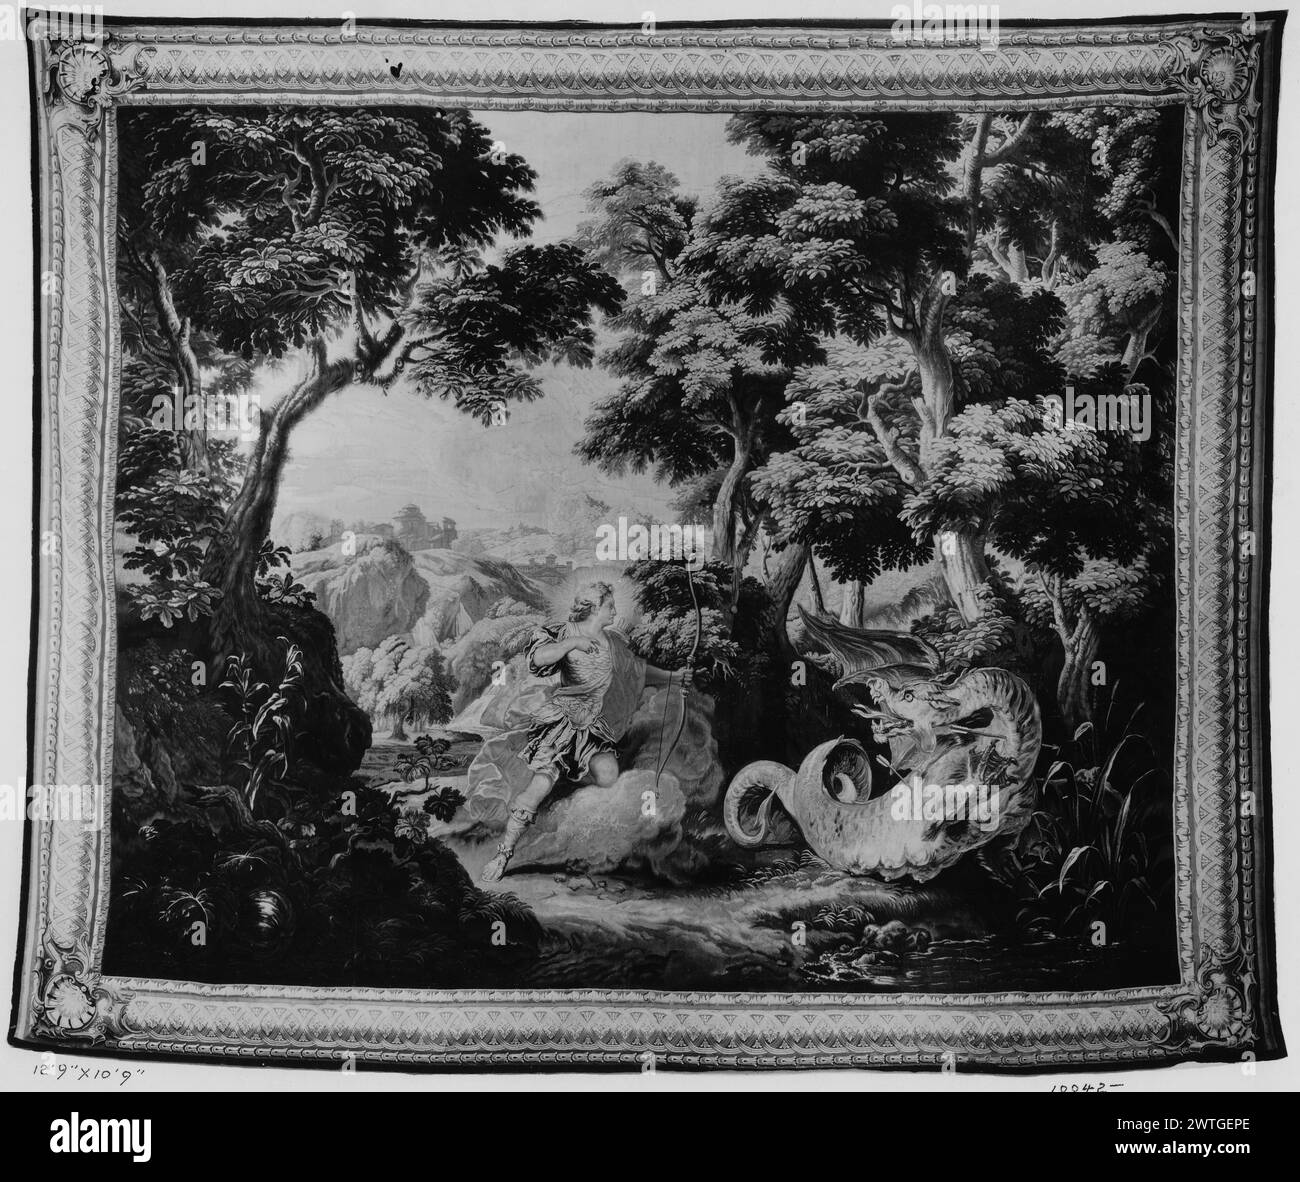 Apollo and the dragon Python. Bertin, Nicolas (French, 1668-1736) (author of design & cartoon creator, figures) [painter] Bonnart, Robert (French, 1652-aft.1729) (cartoon creator, landscape) [painter] c. 1704-1720 Tapestry Dimensions: H 10'10" x W 12'7" Tapestry Materials/Techniques: wool & silk Culture: French Weaving Center: Paris Ownership History: French & Co.?. Gift of Mrs. Matthias Plum. United States, Ohio, Cleveland, Cleveland Museum of Art, accno. 56-327. Apollo shoots Python with bow & arrows in wooded landscape (BRD) picture-frame border with interlaced rosetted strapwork, shell car Stock Photo